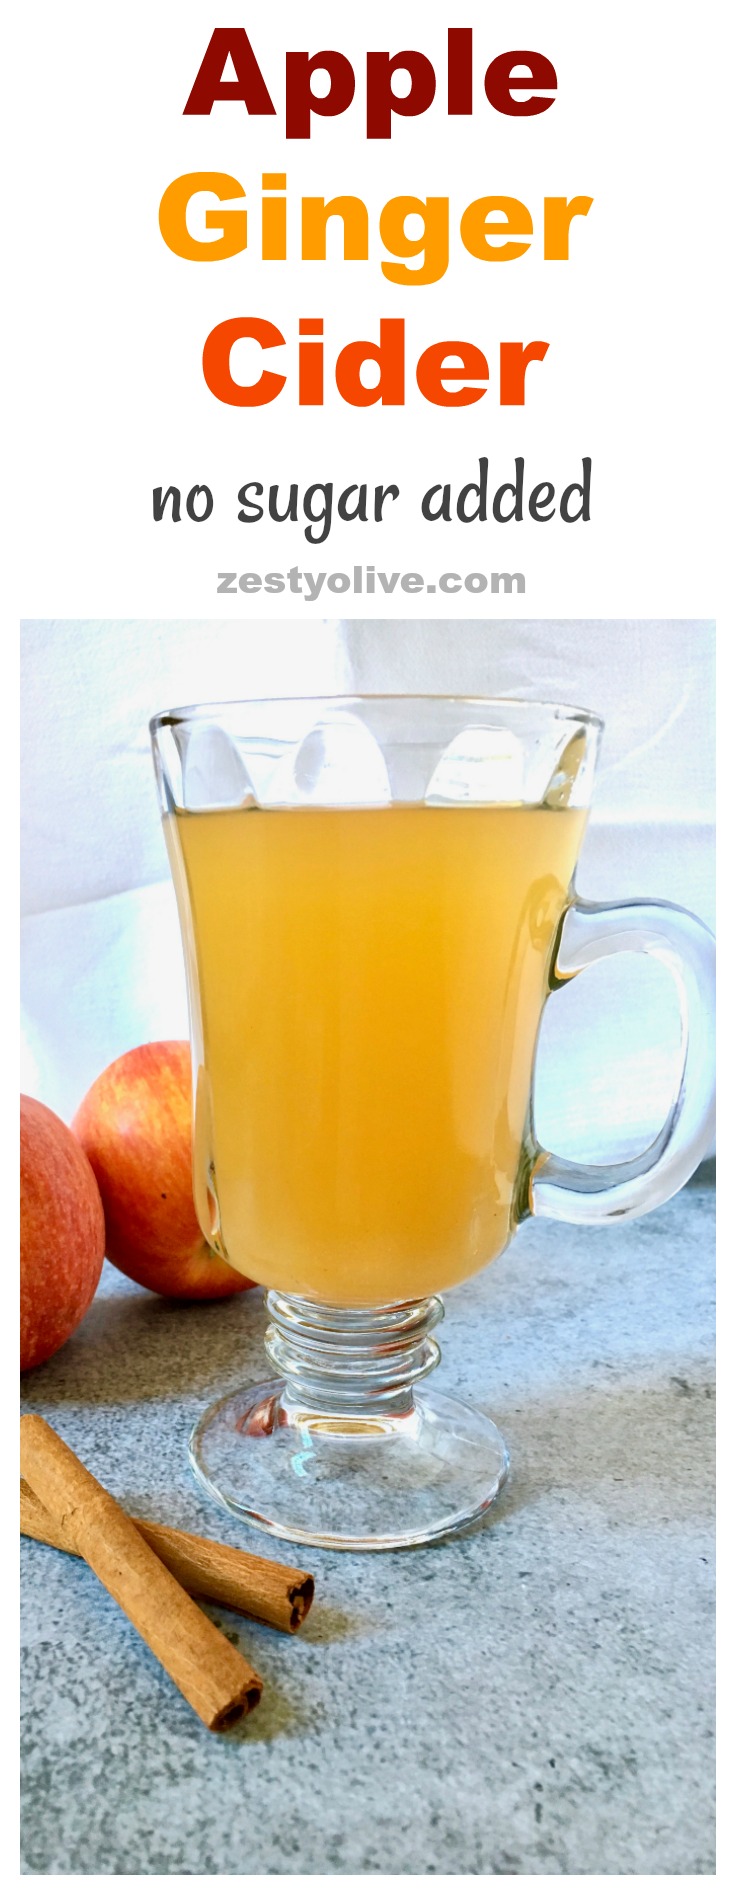 This Easy Homemade Apple Ginger Cider Recipe with no added sugar will fill your home with aromas of the season: apple, orange, ginger, cinnamon and cloves, while it simmers in your crock pot.